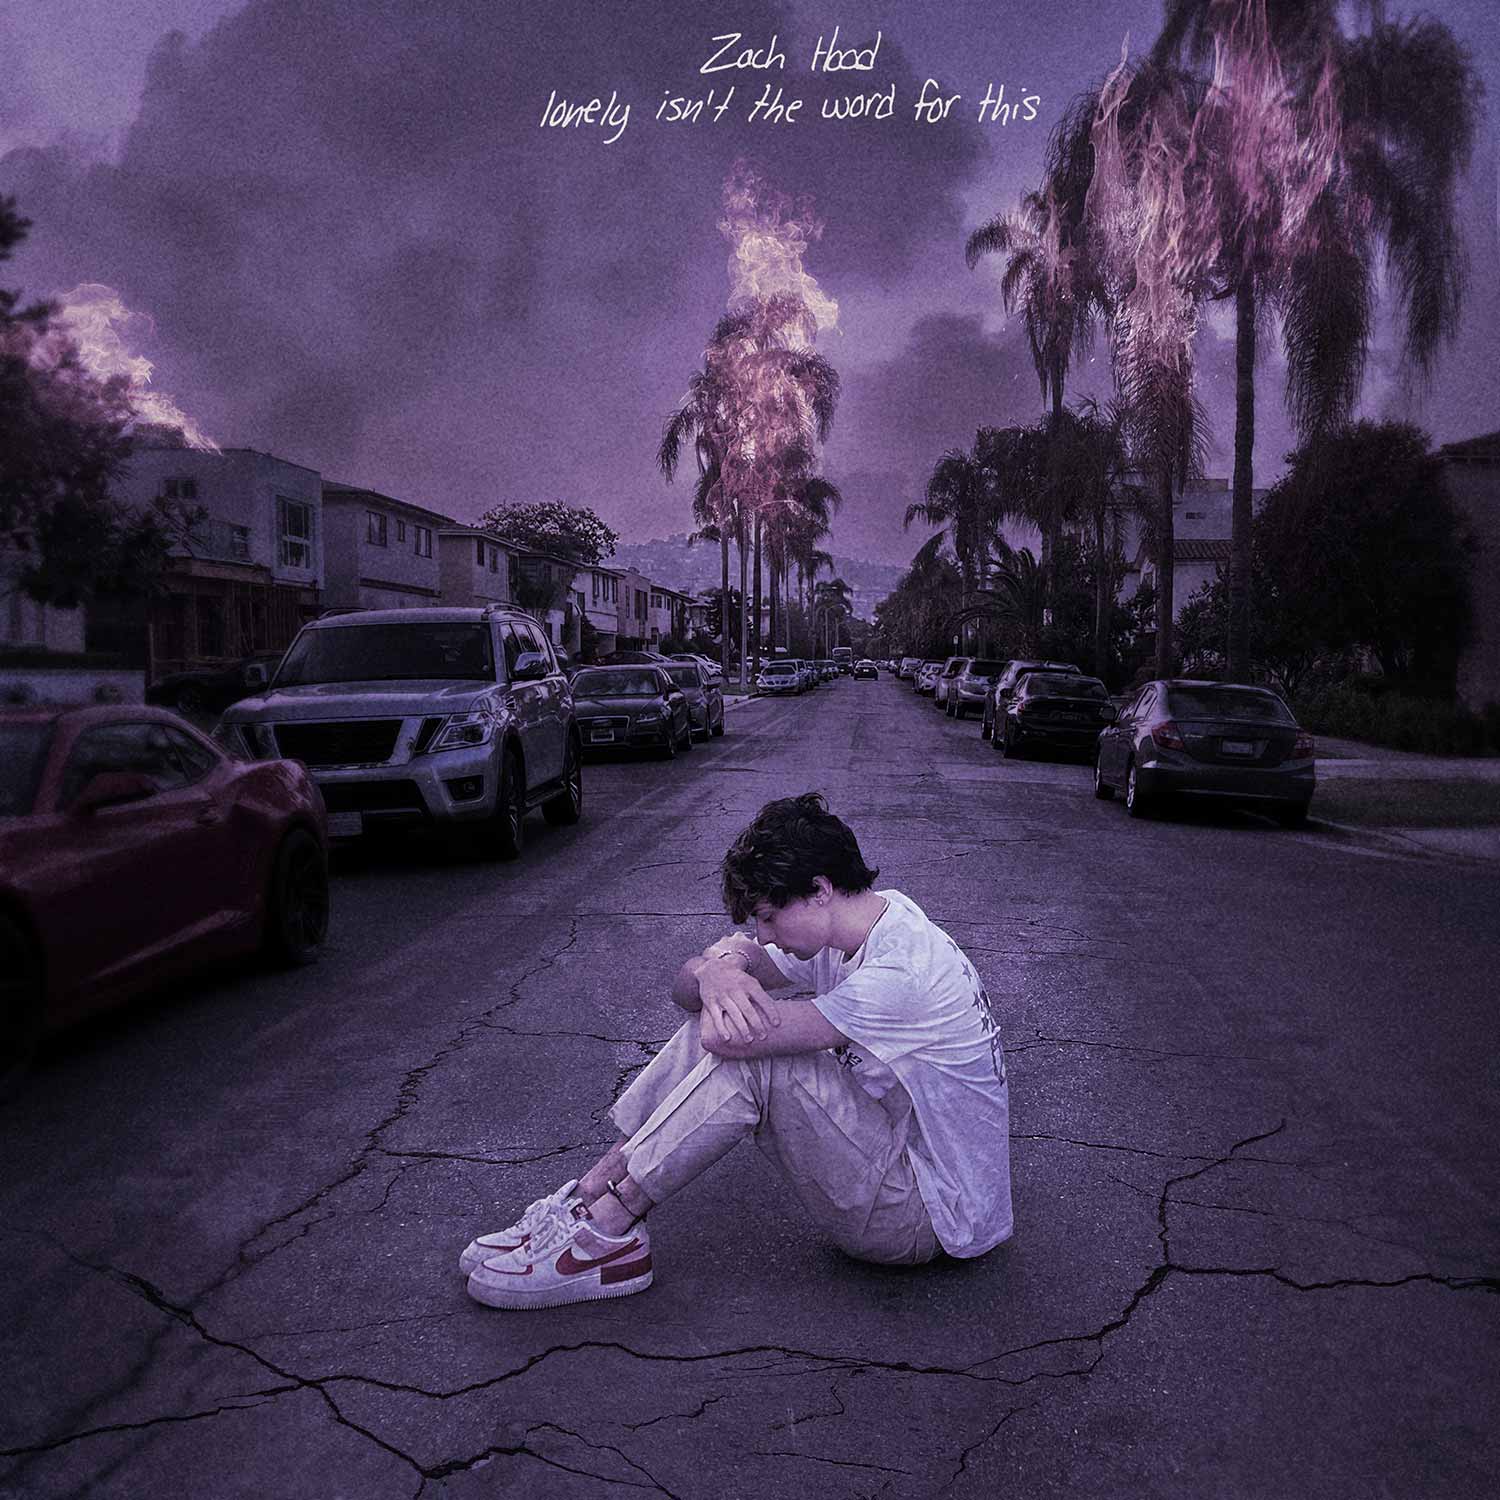 lonely isn't the word for this cover